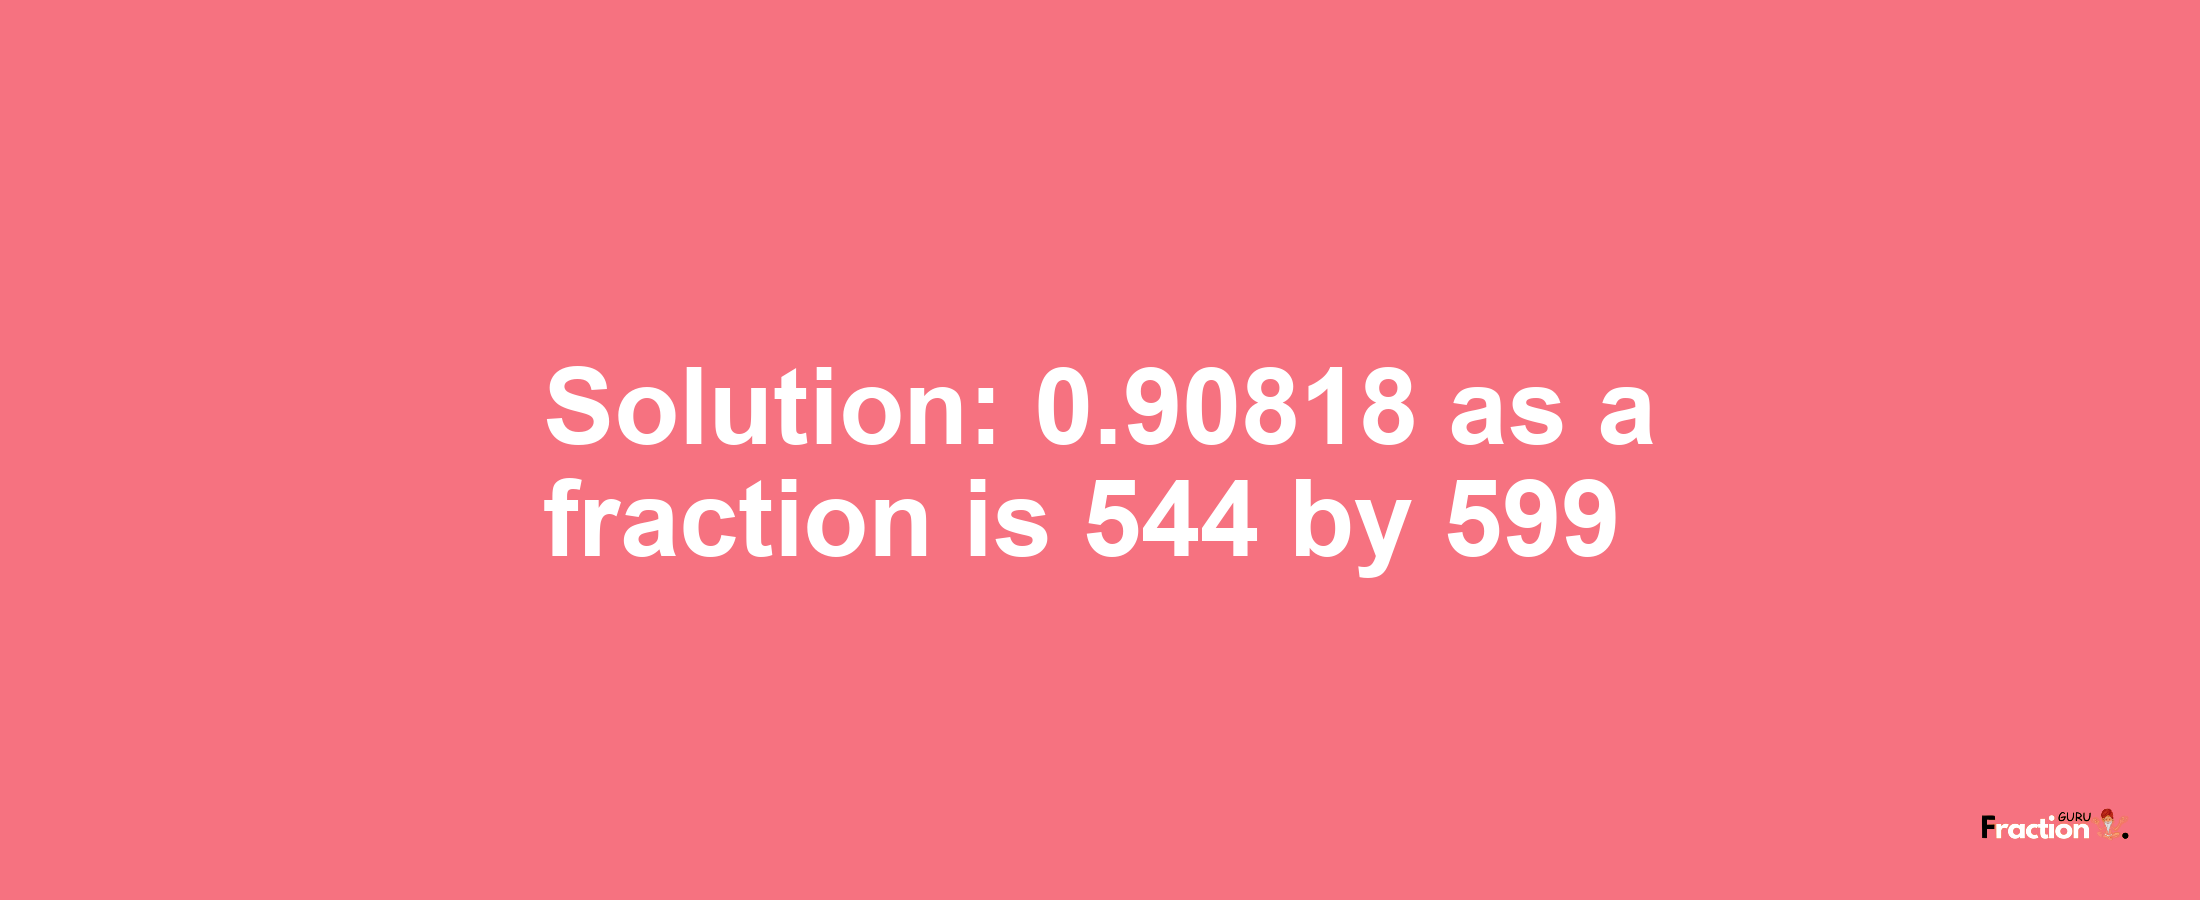 Solution:0.90818 as a fraction is 544/599